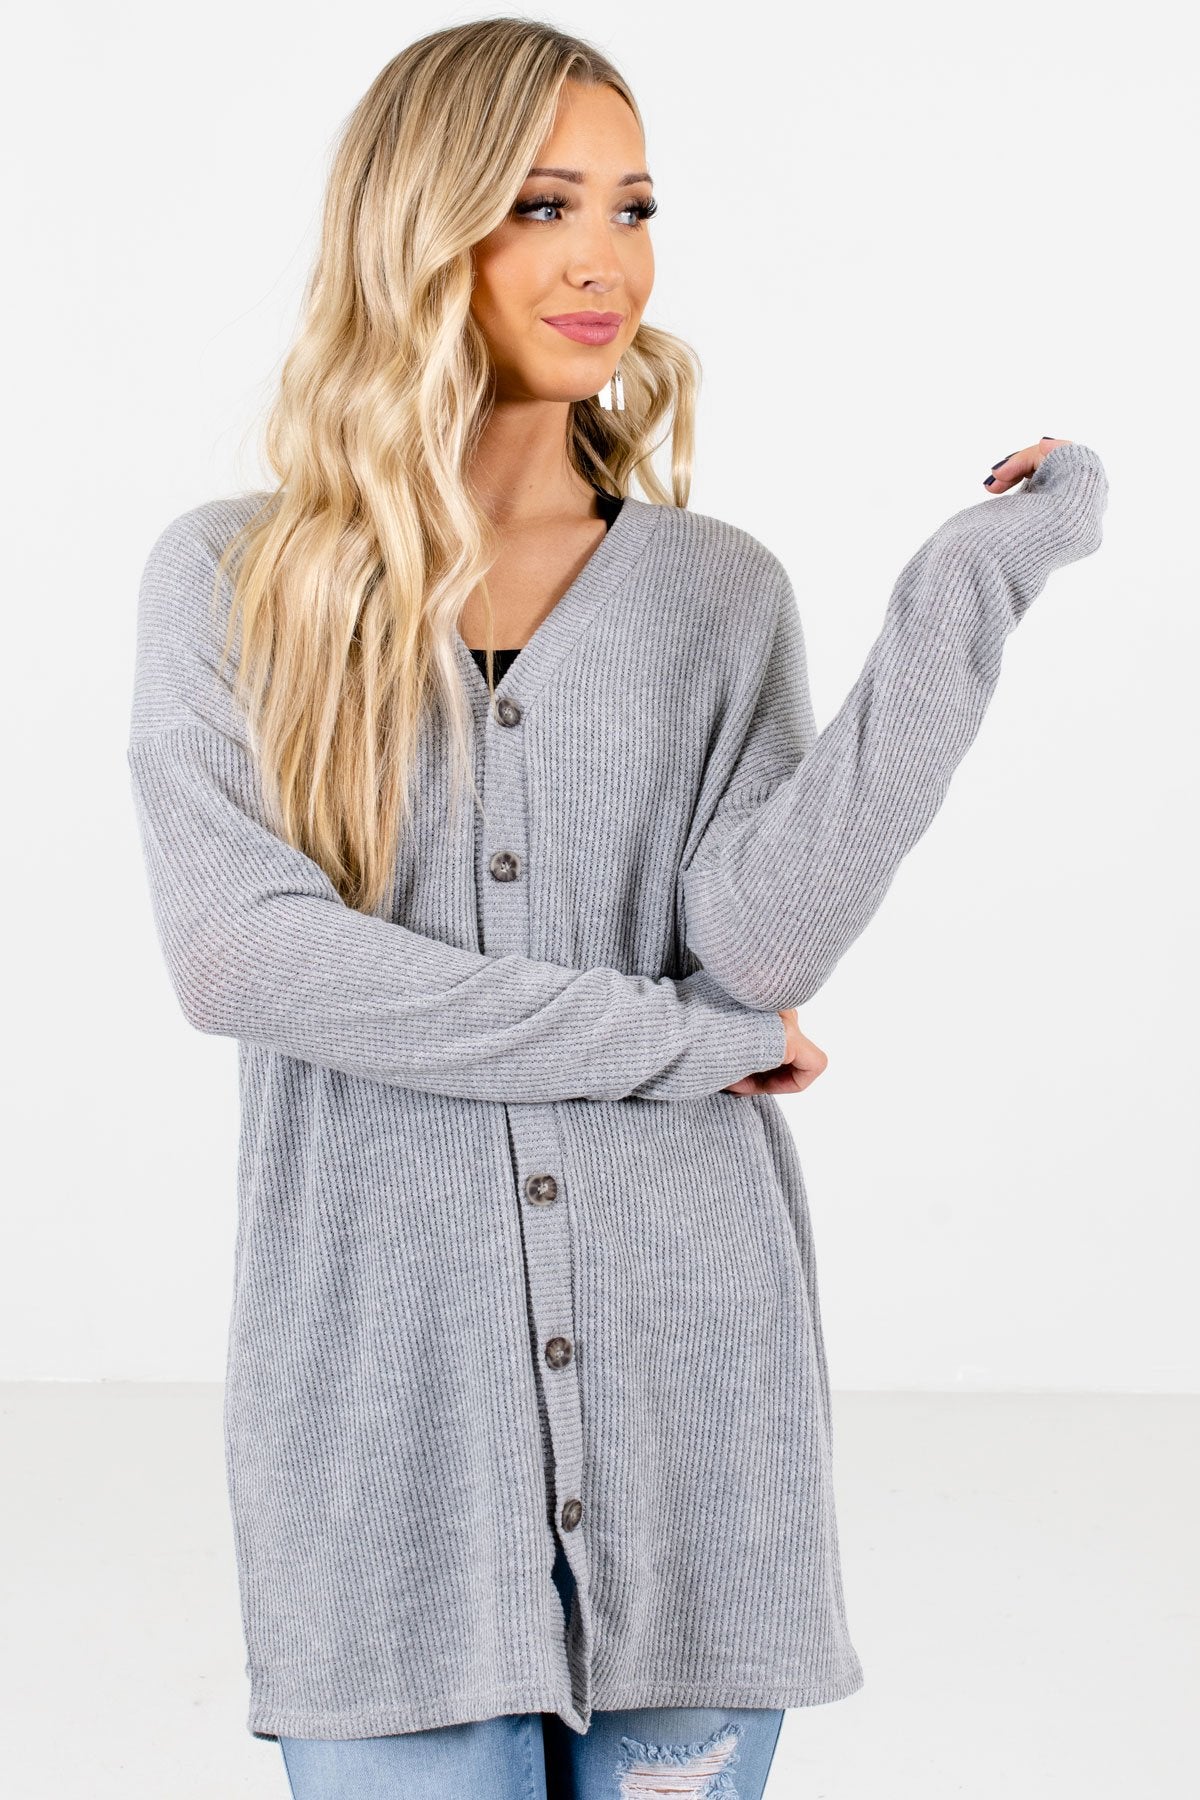 Women’s Heather Gray Warm and Cozy Boutique Tops